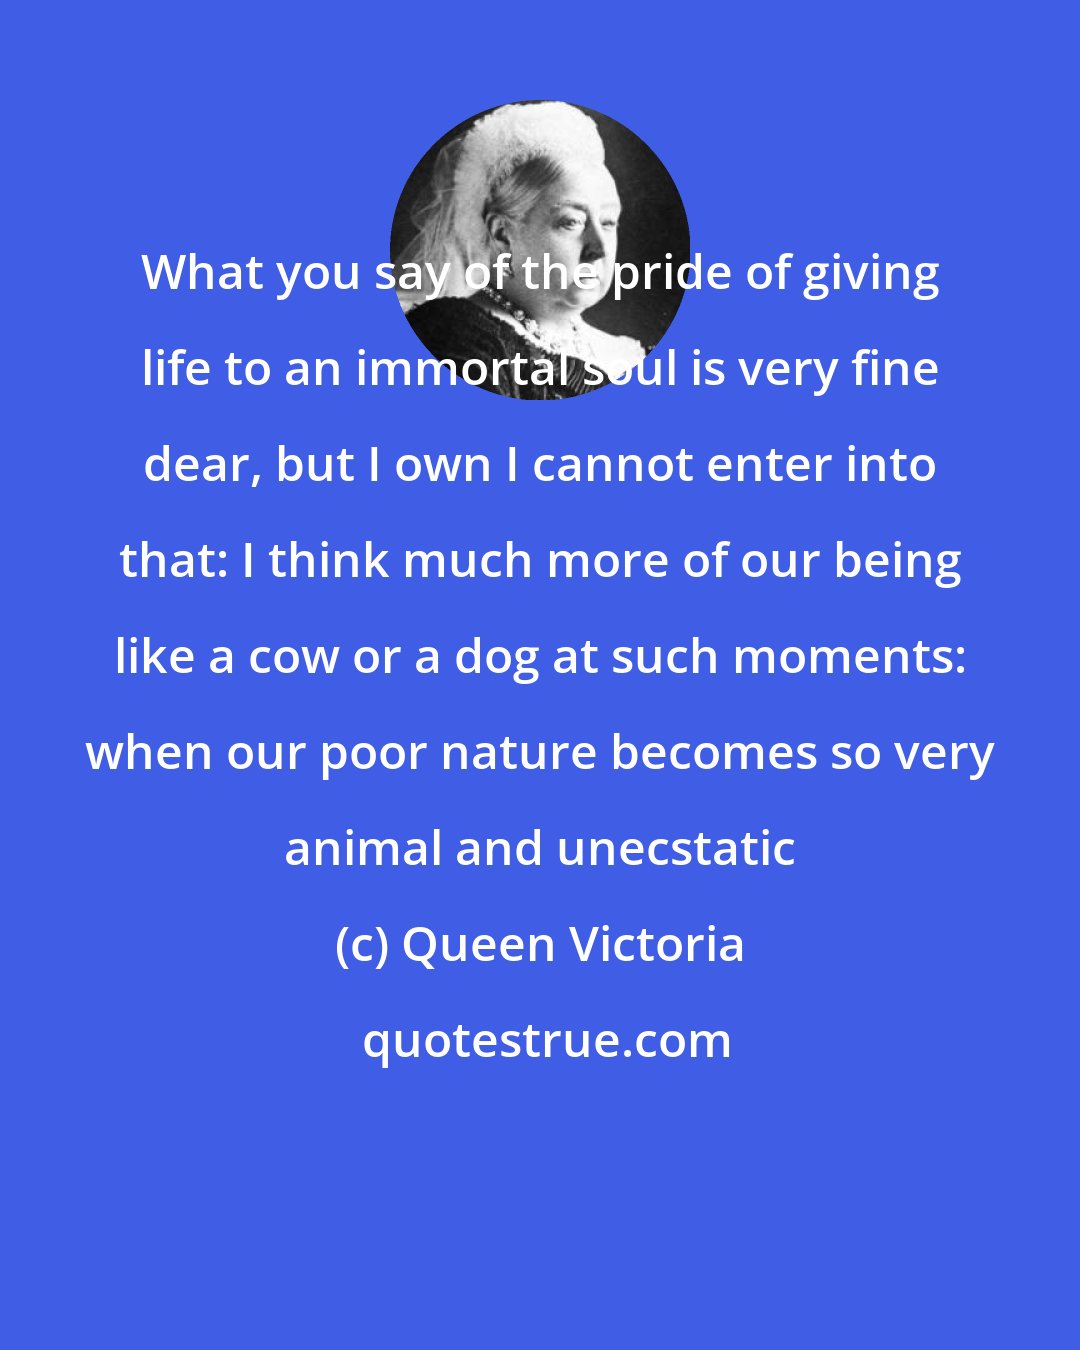 Queen Victoria: What you say of the pride of giving life to an immortal soul is very fine dear, but I own I cannot enter into that: I think much more of our being like a cow or a dog at such moments: when our poor nature becomes so very animal and unecstatic